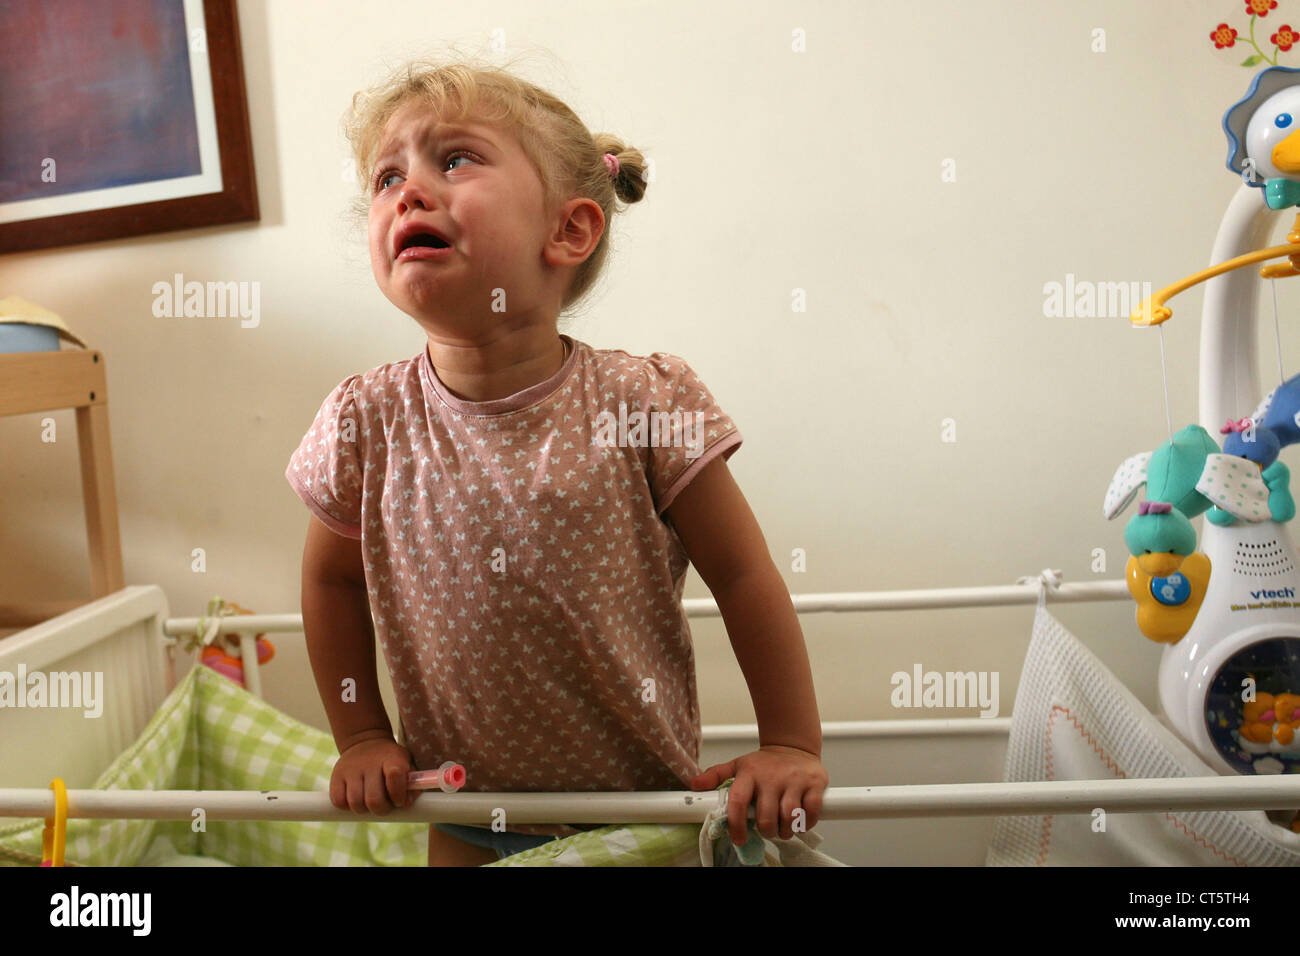 1-3 YEARS OLD BABY CRYING Stock Photo